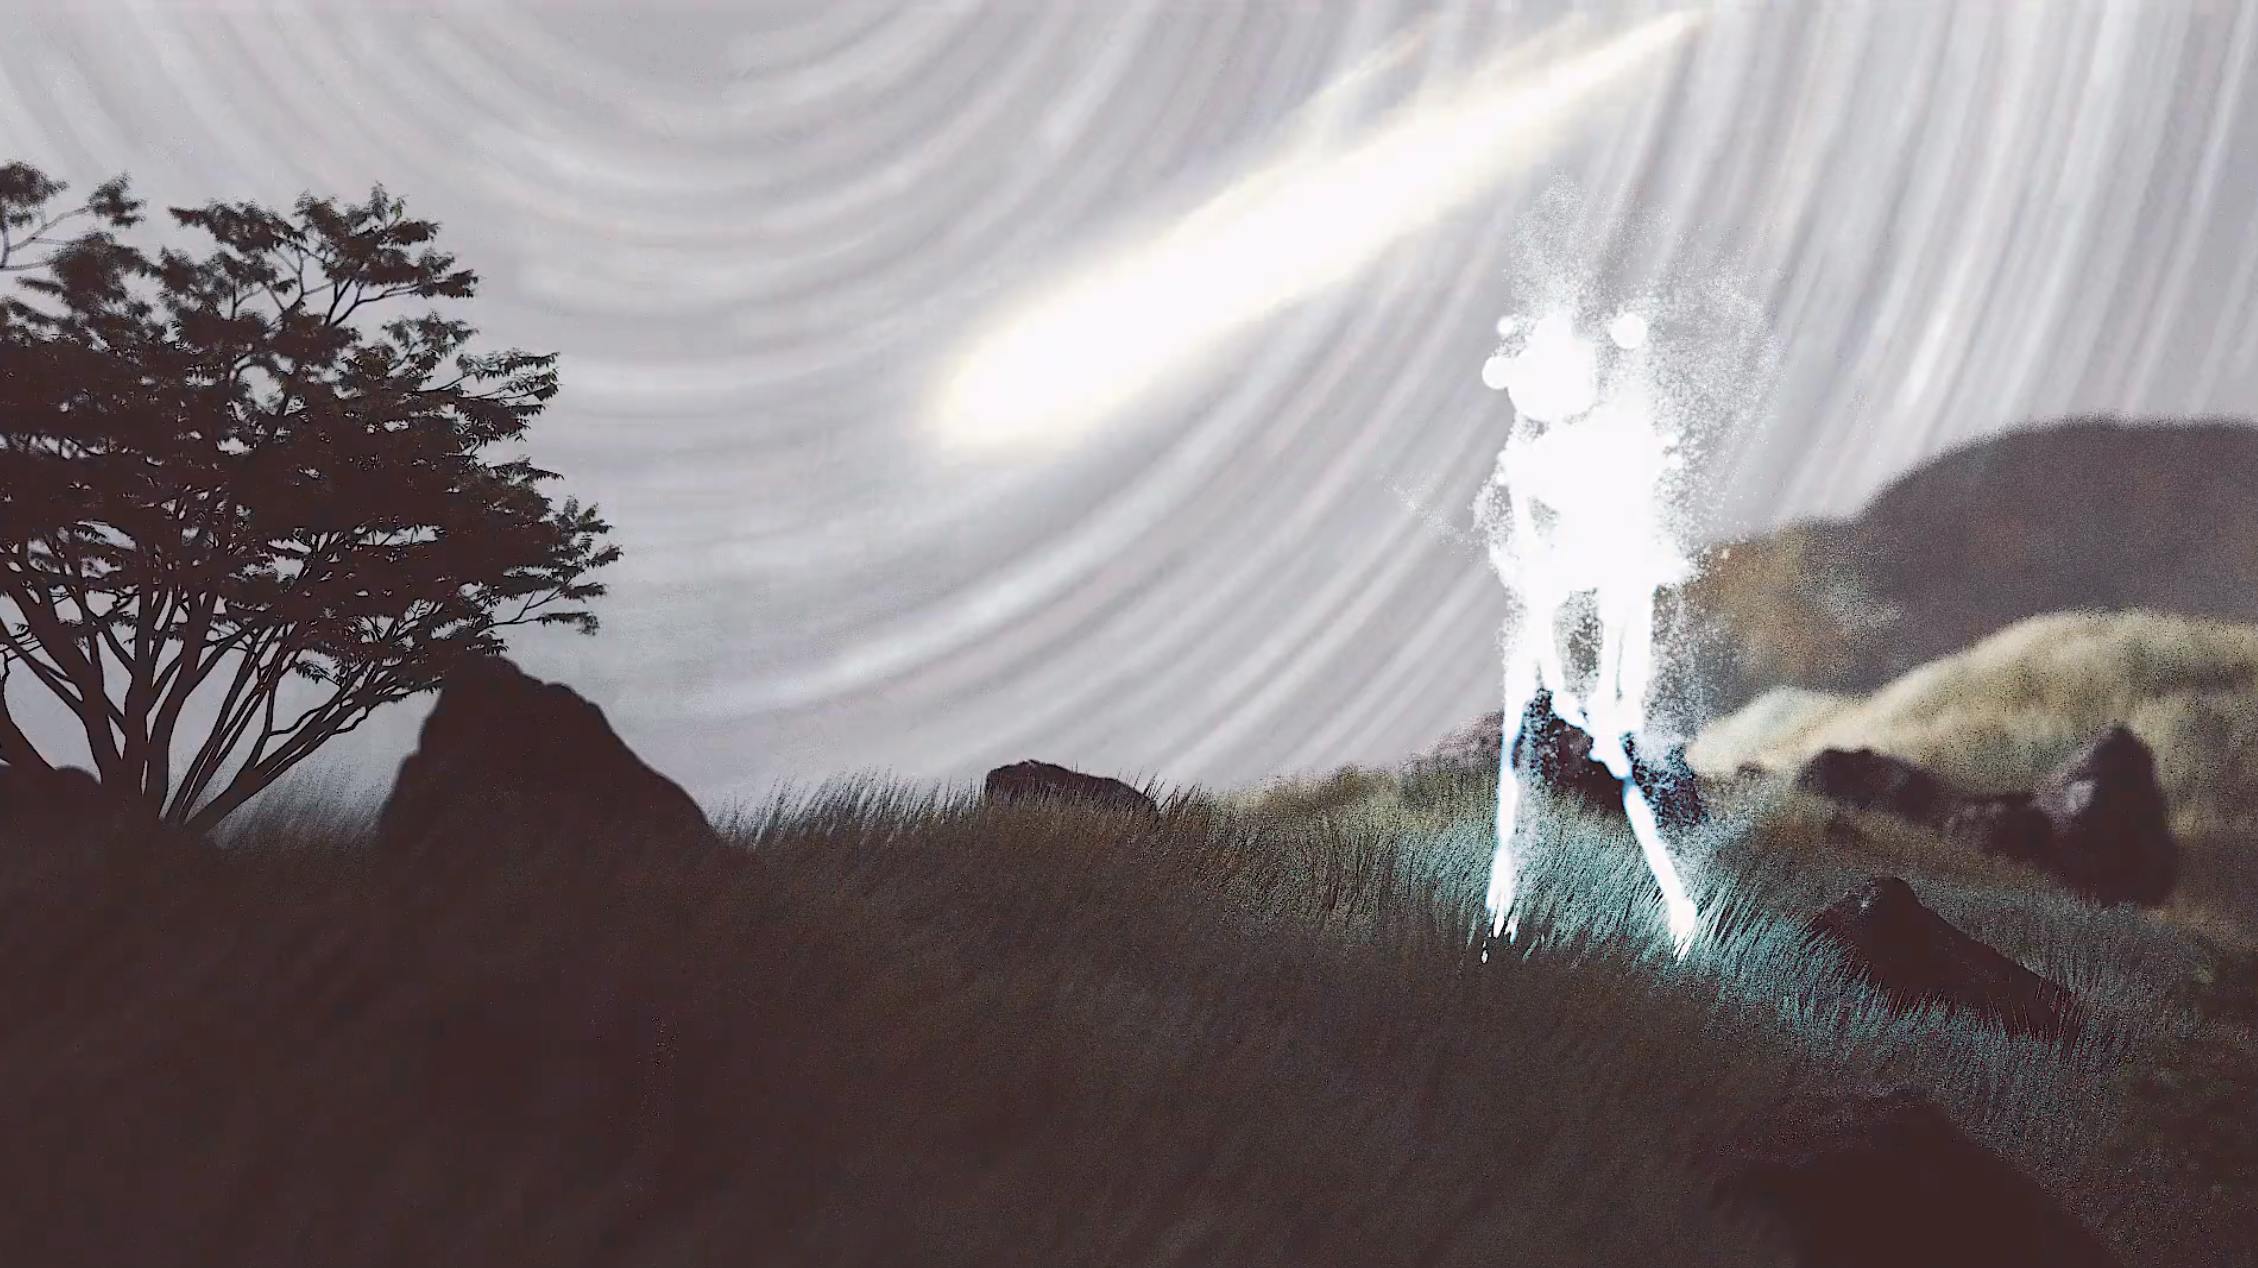 A glowing white figure stands on a hill as a comet blazes in the background